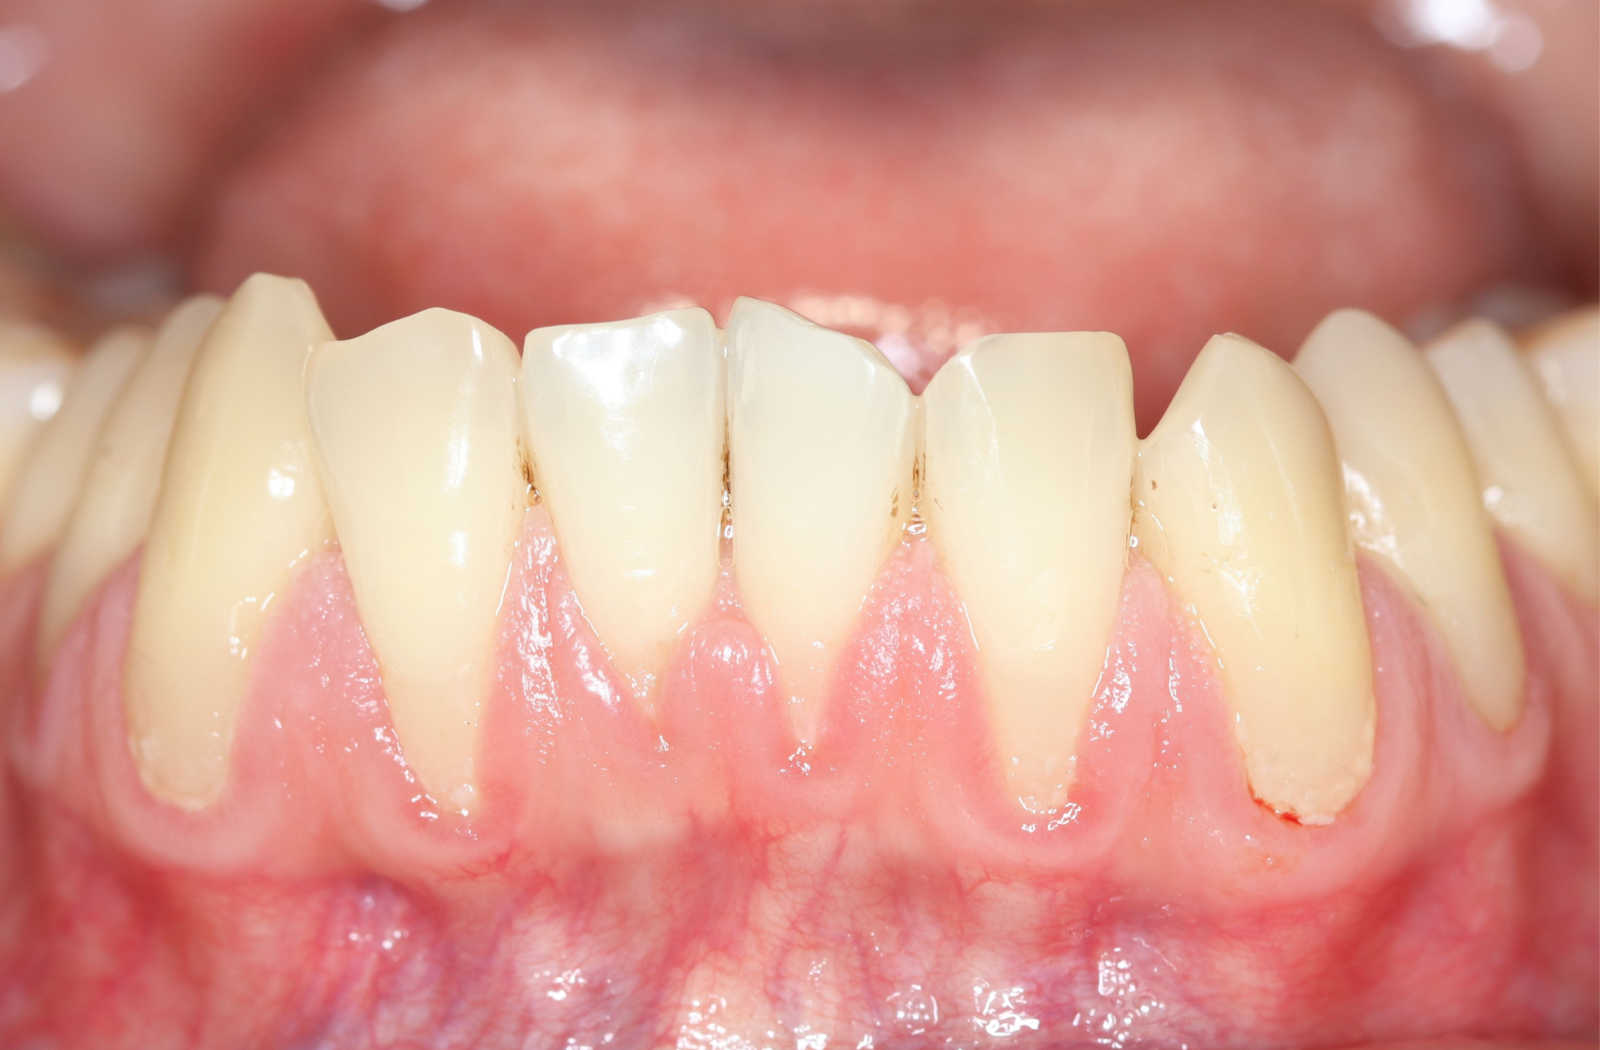 A close-up of a human mouth showing receding gums, exposure of the roots of the teeth caused by a loss of gum tissue.